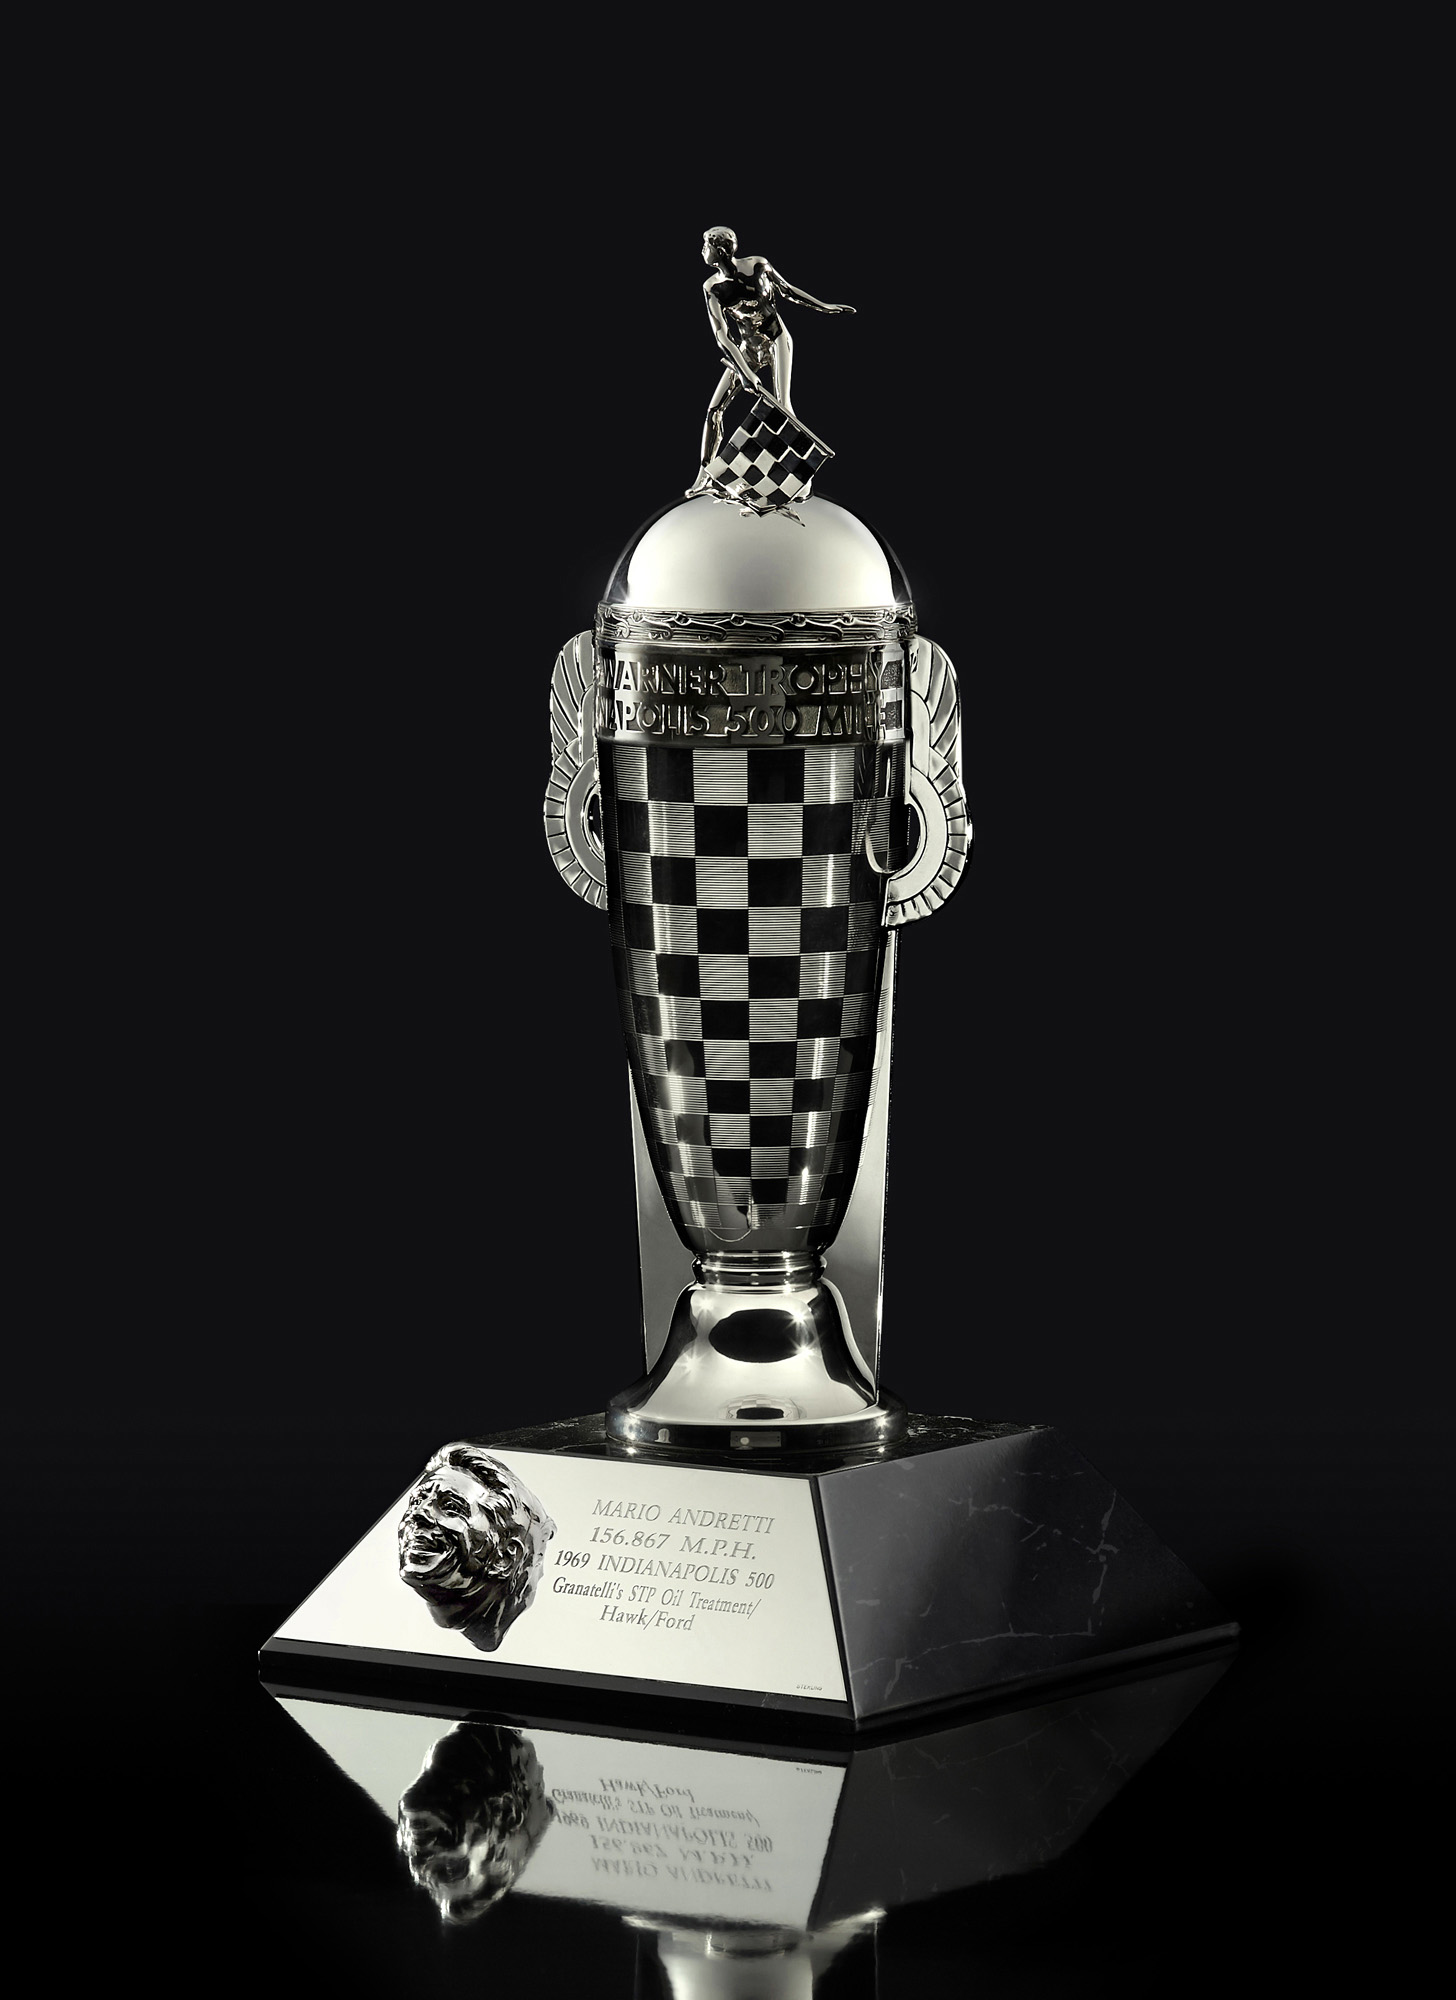 Mario Andretti's Championship Driver's Trophy (Baby Borg), a gift from BorgWarner in celebration of the 50th anniversary of his Indianapolis 500 win